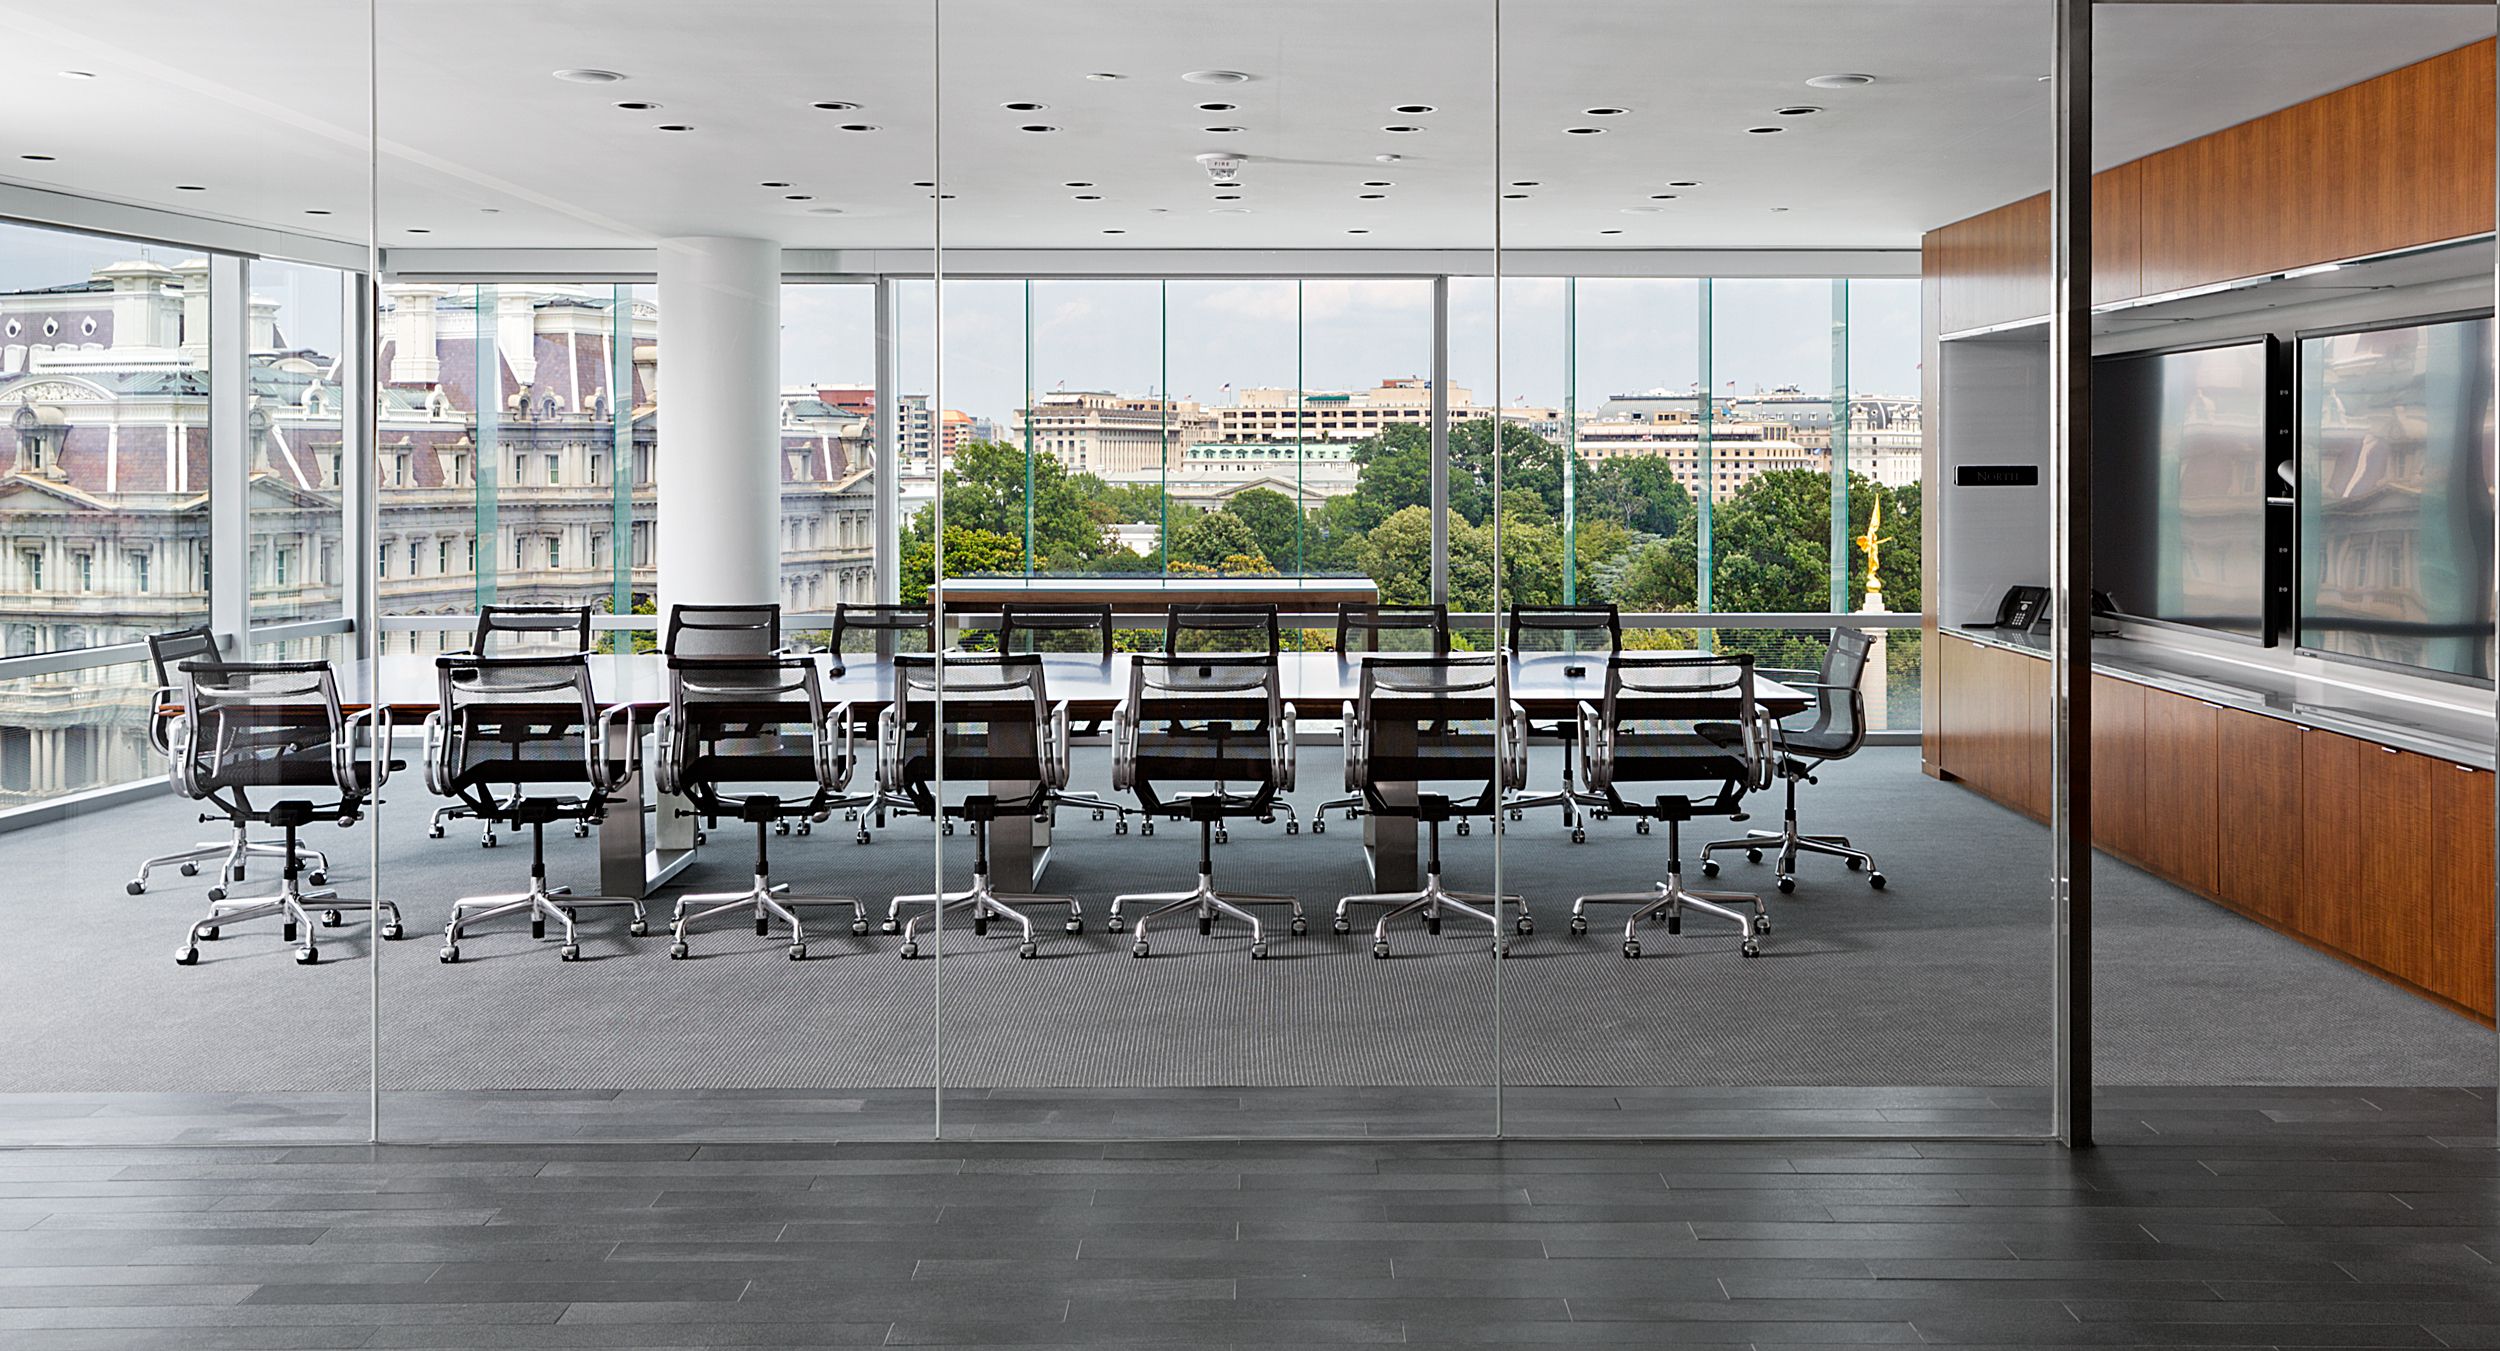 MESA conference tables were provided with light-scale metal bases to enhance the dramatic, open-air space.